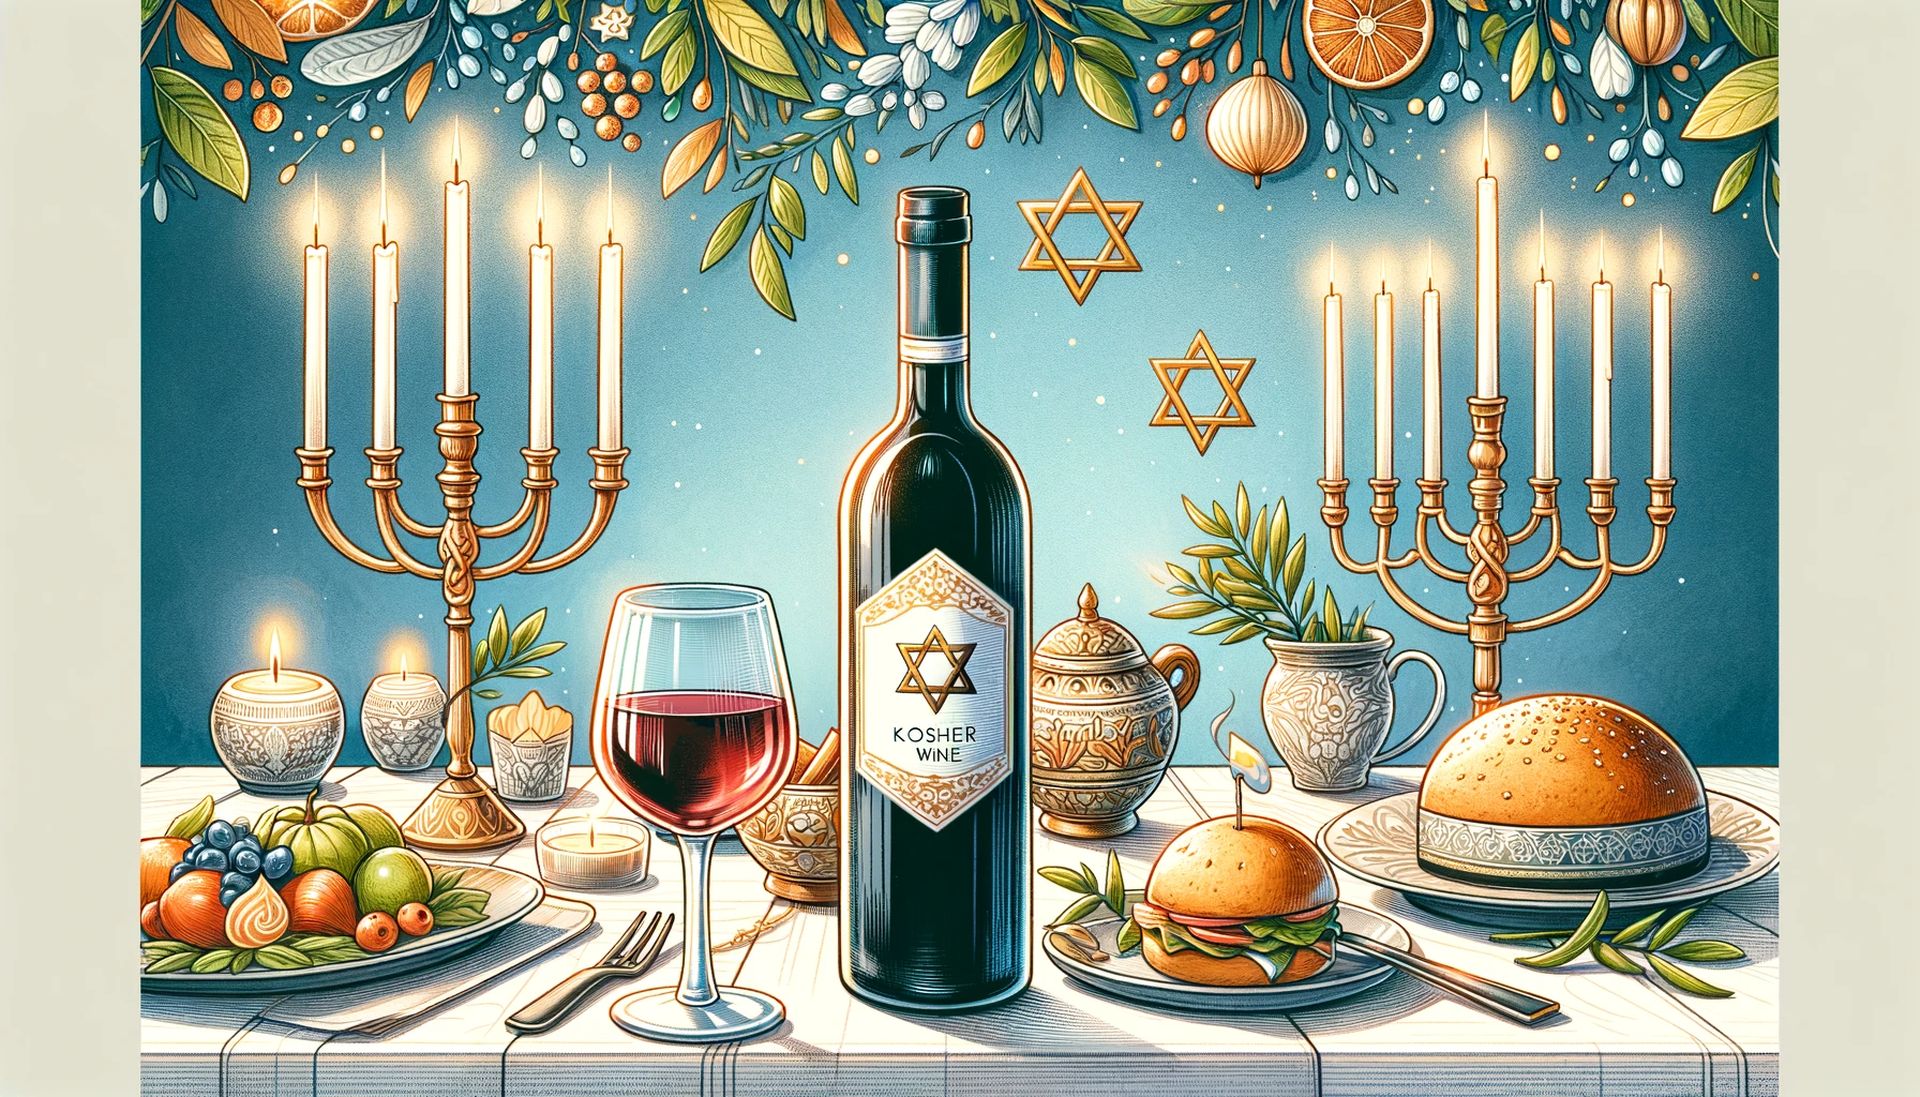 a simpler yet meaningful depiction of a festive Jewish holiday scene, focusing on a bottle of kosher wine on a tastefully set table. 